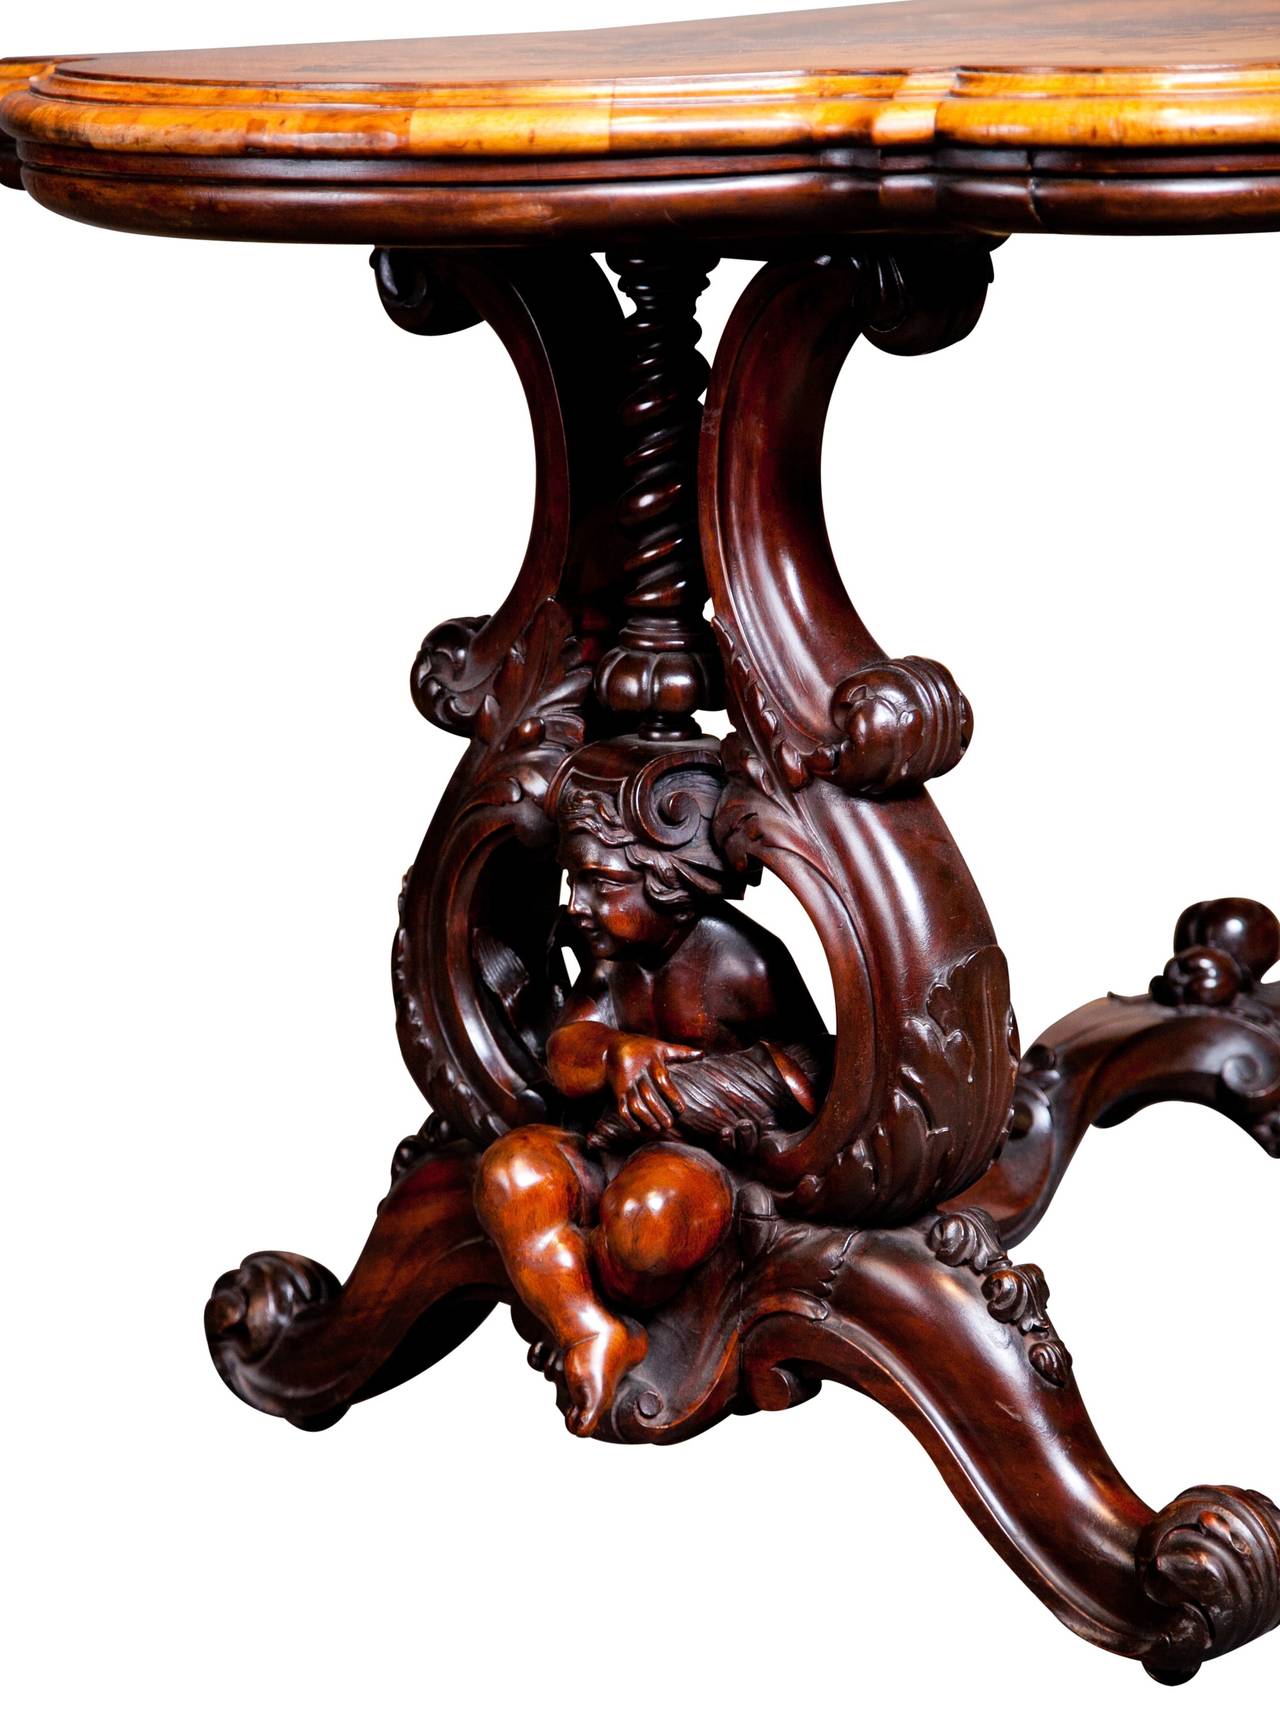 This exquisite, exhibition quality English center table was crafted in the manner of William Cookes of Warwick, England.

The table’s top is profusely inlaid with naturalistic forms and sits on a finely carved twin pedestal base displaying Putti